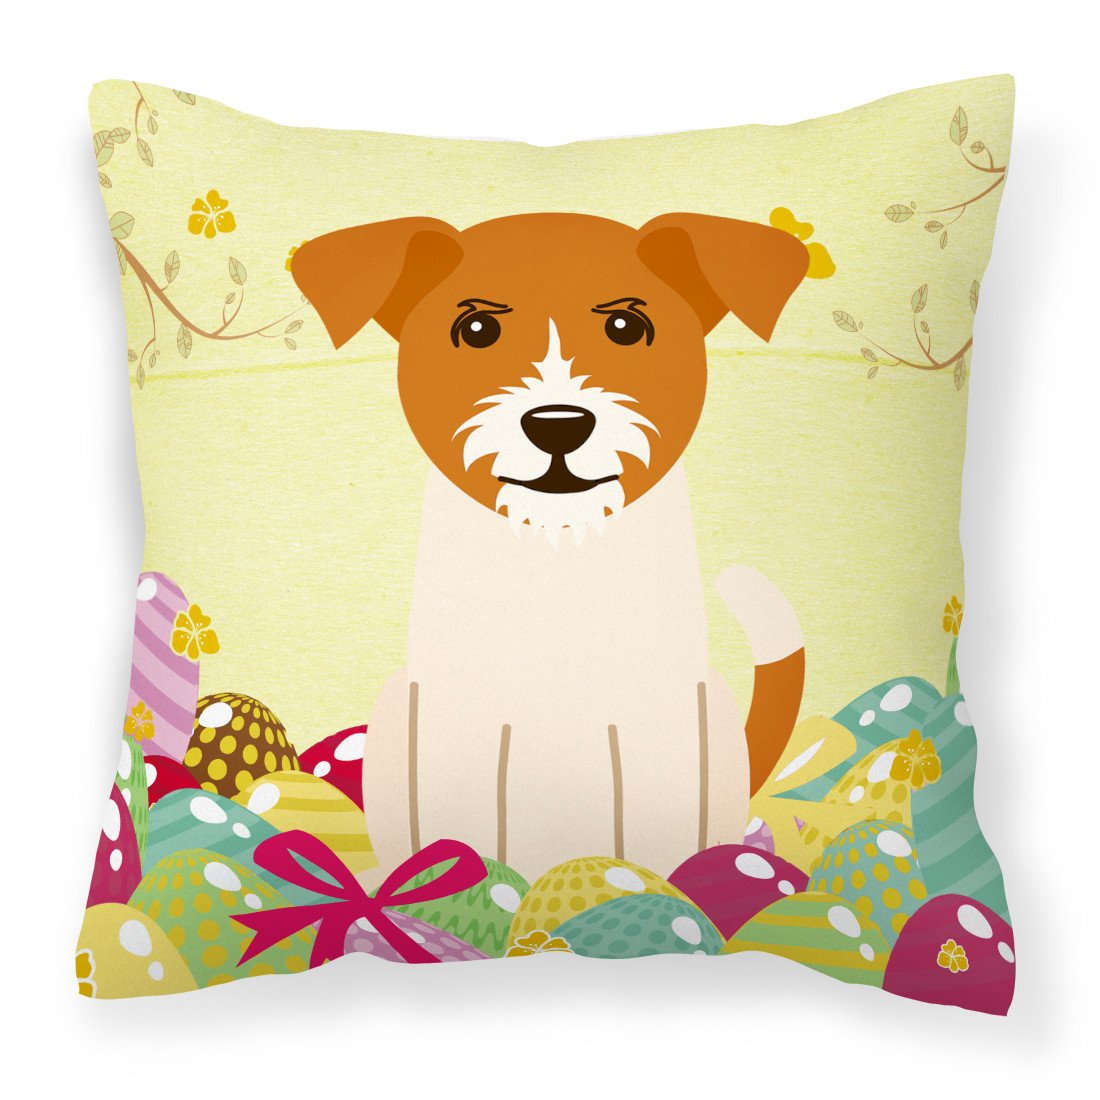 Easter Eggs Jack Russell Terrier Fabric Decorative Pillow BB6108PW1818 by Caroline's Treasures